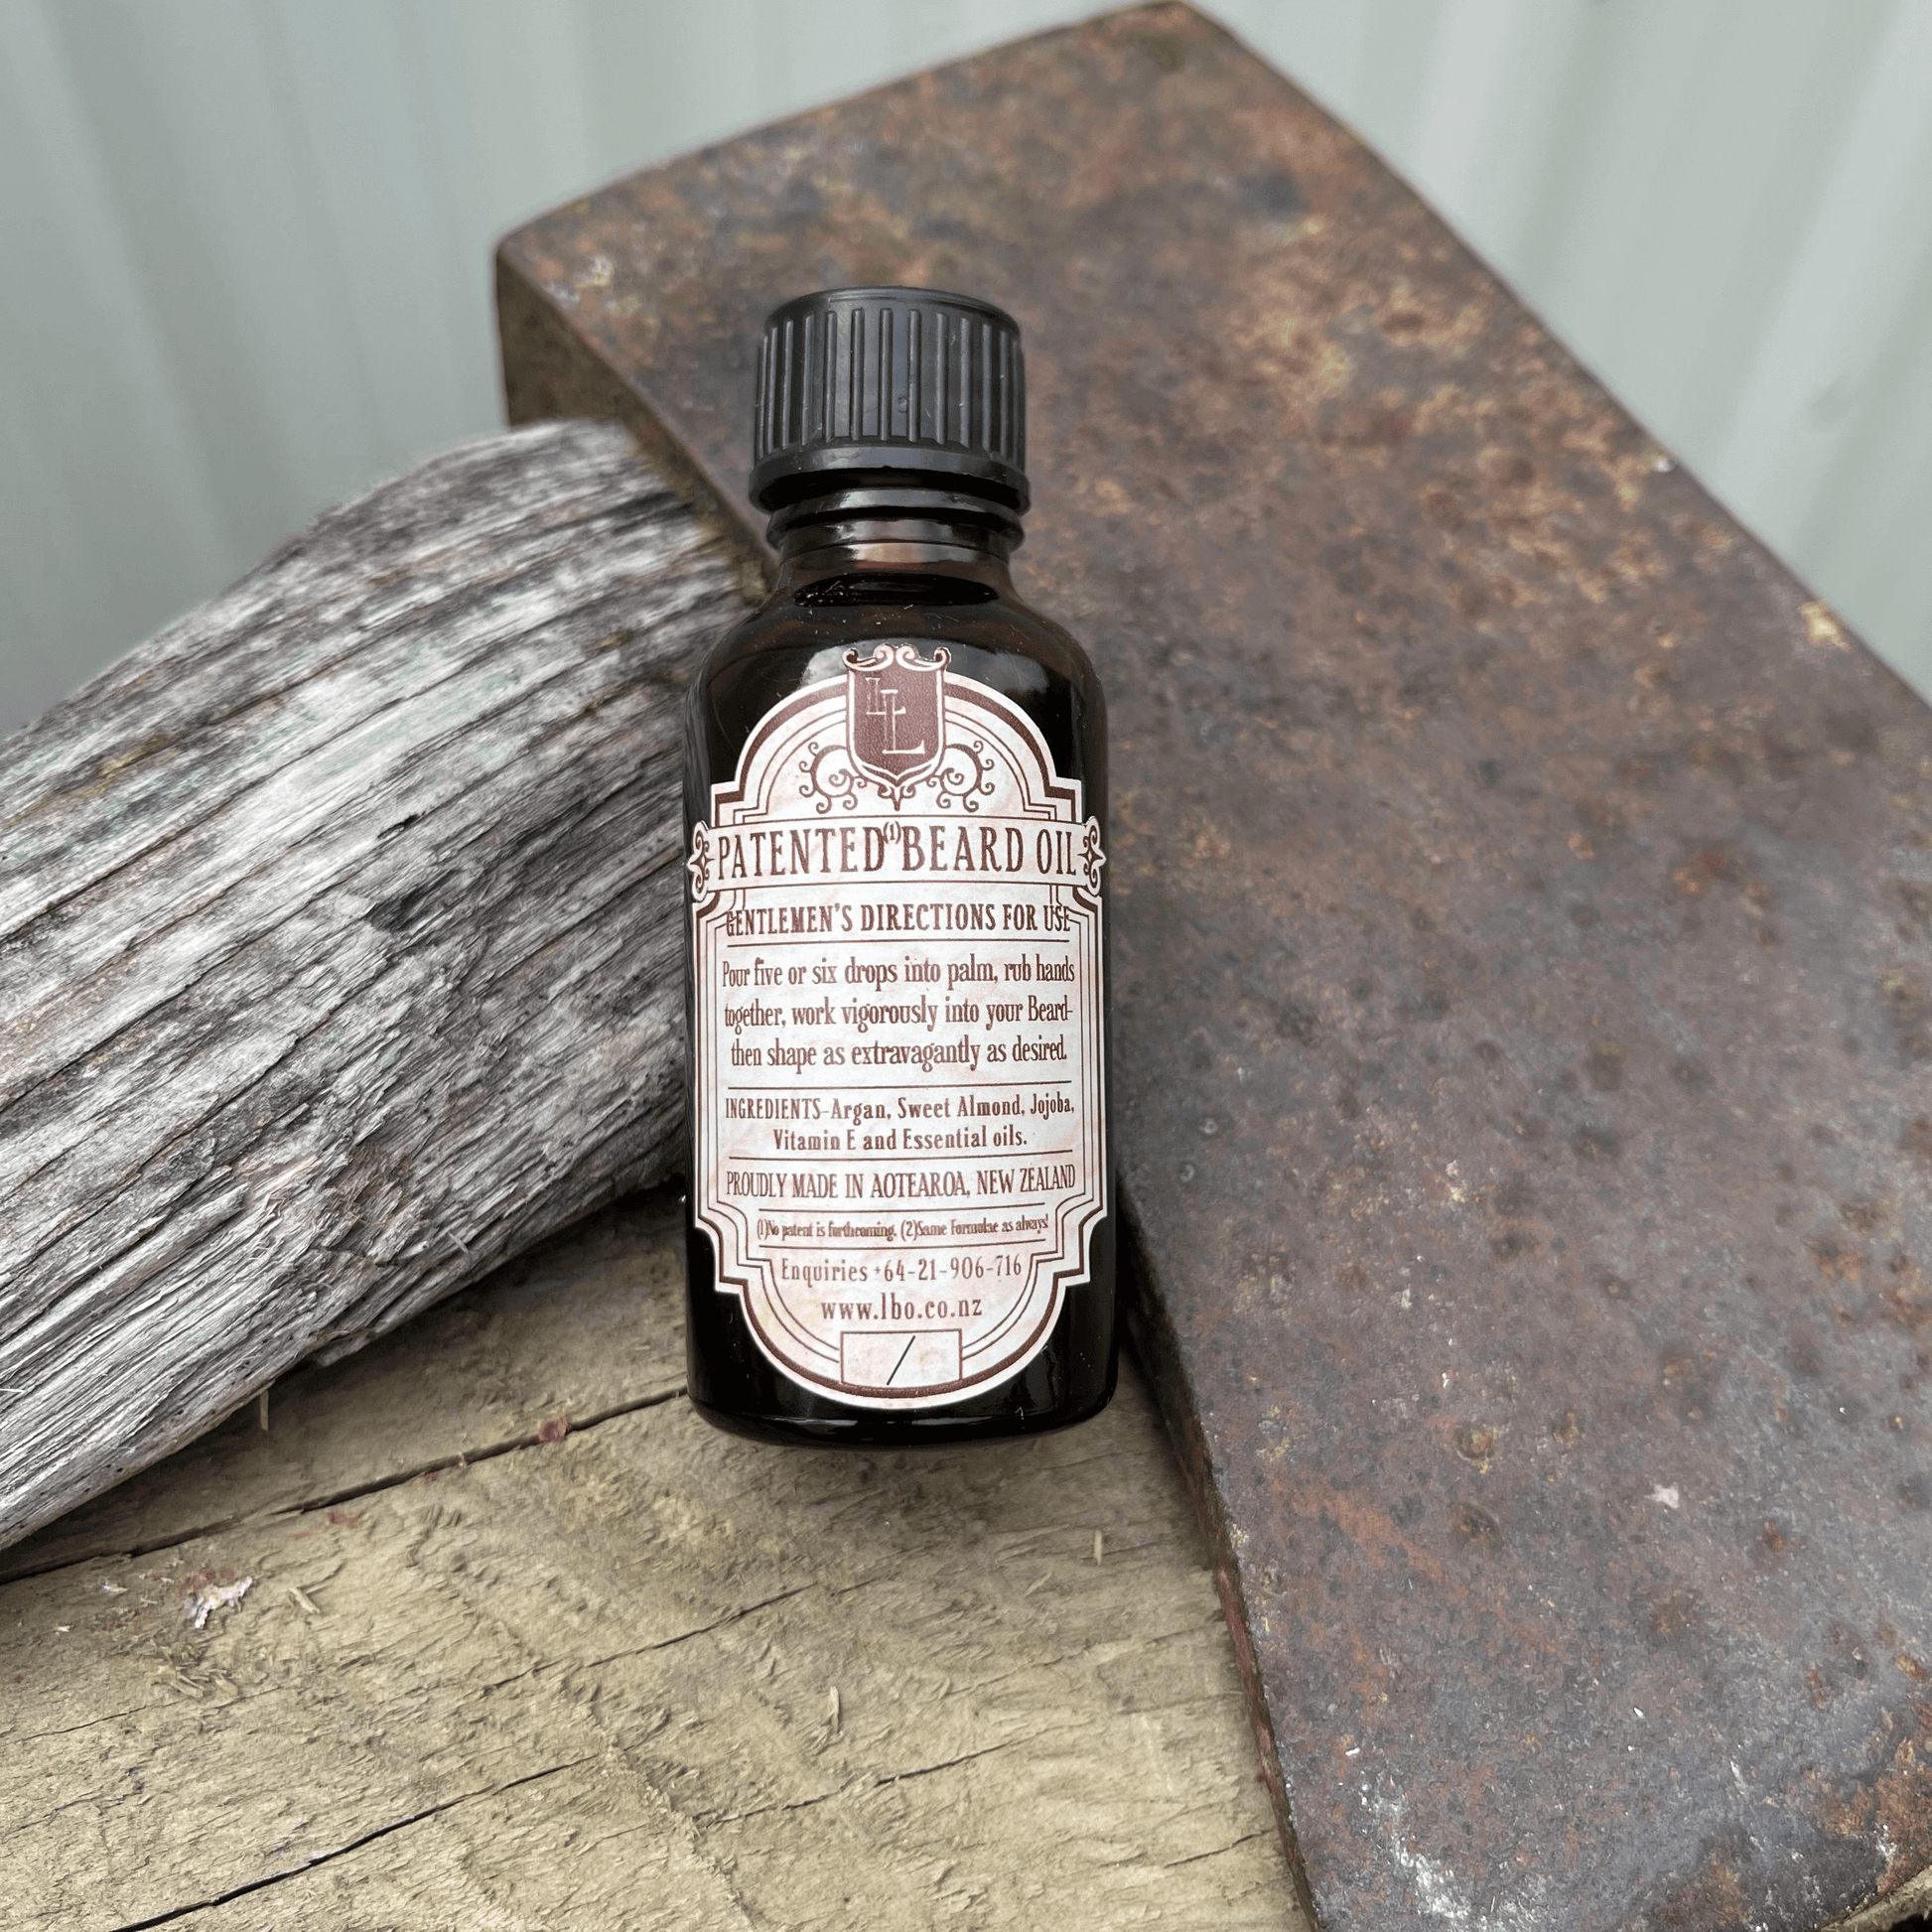 Beard oil bottle with directions for use, resting against an axe blade.